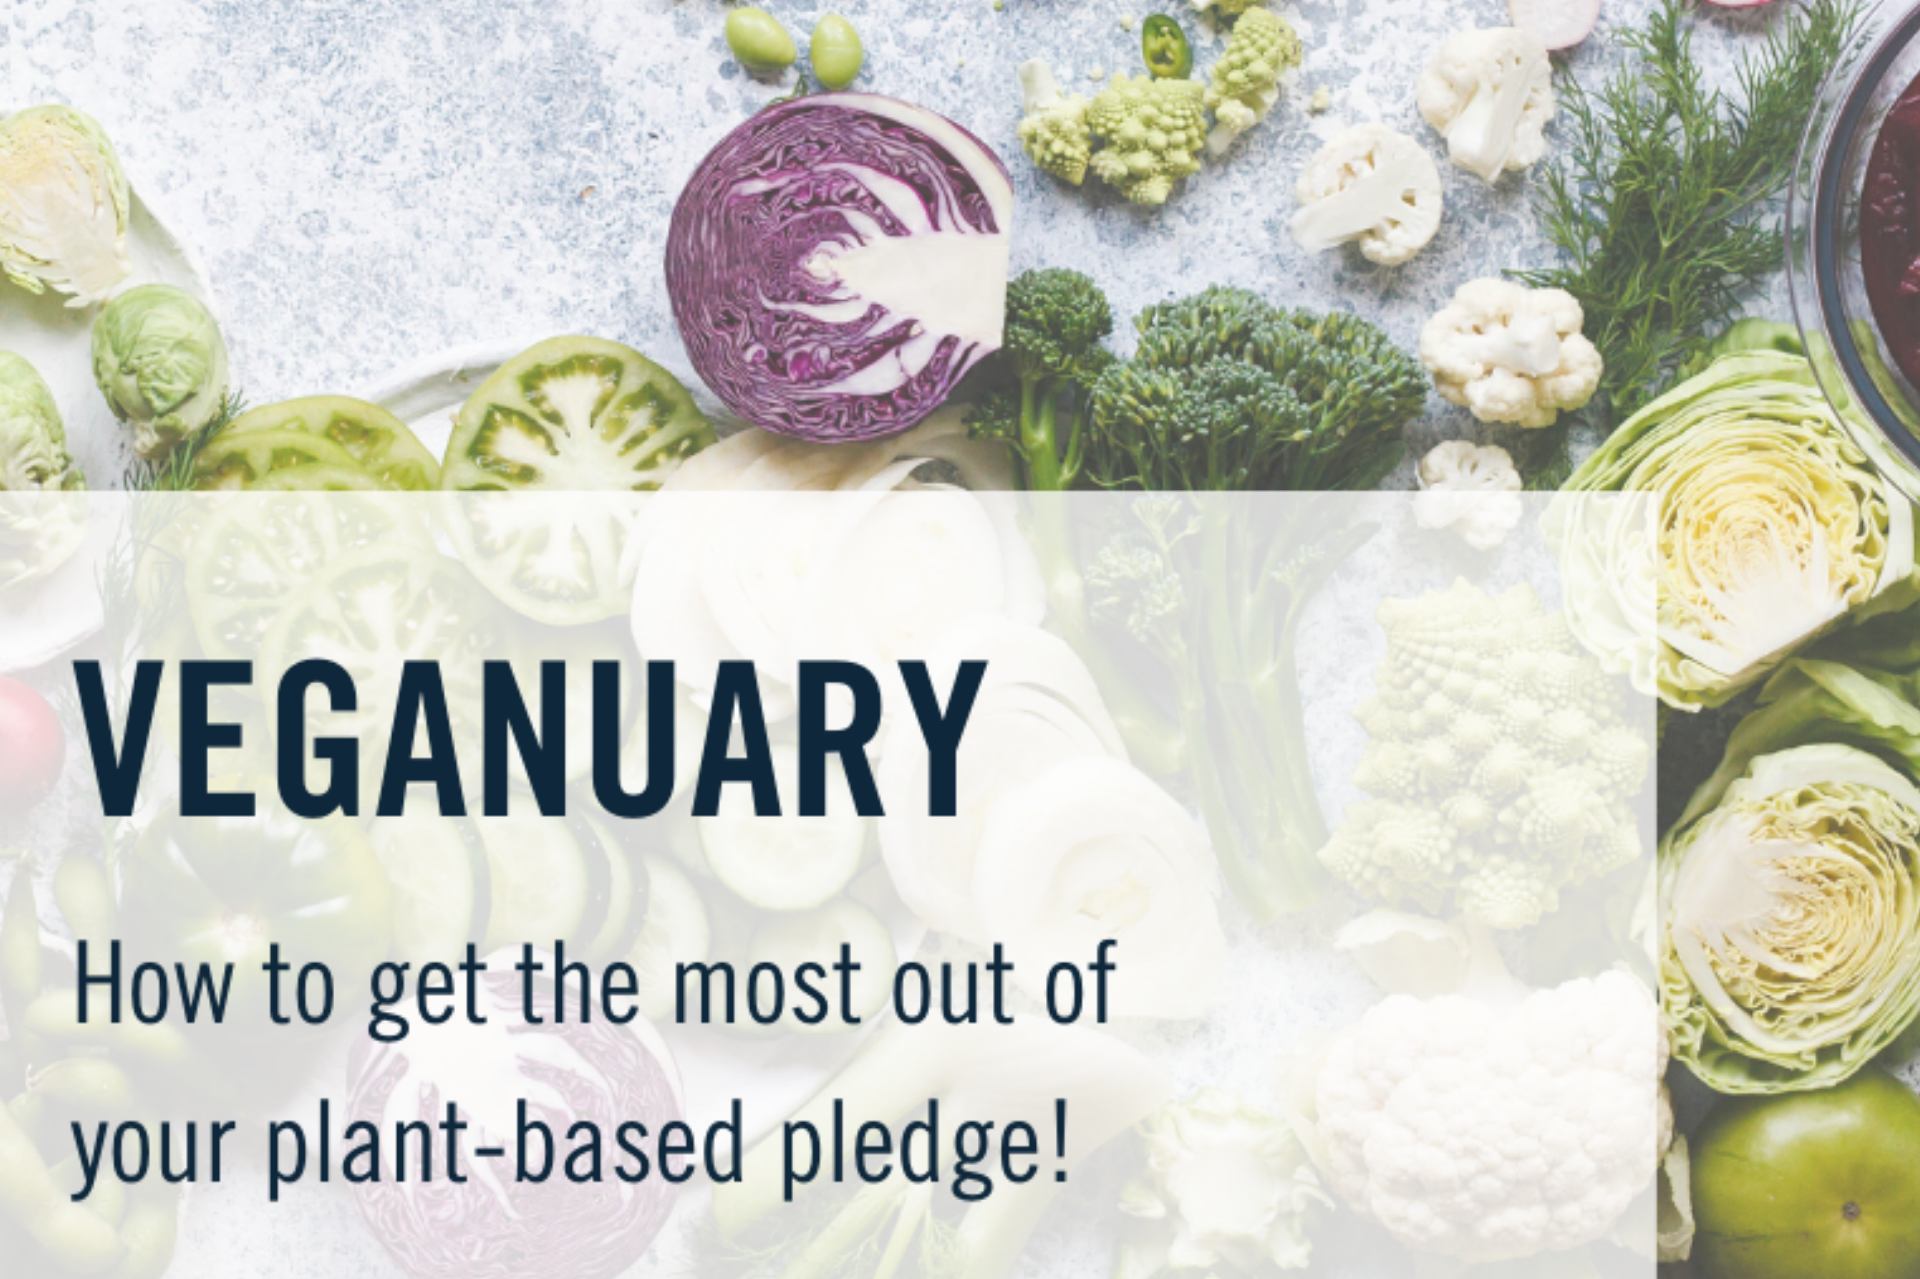 Making the most of your plant-based pledge